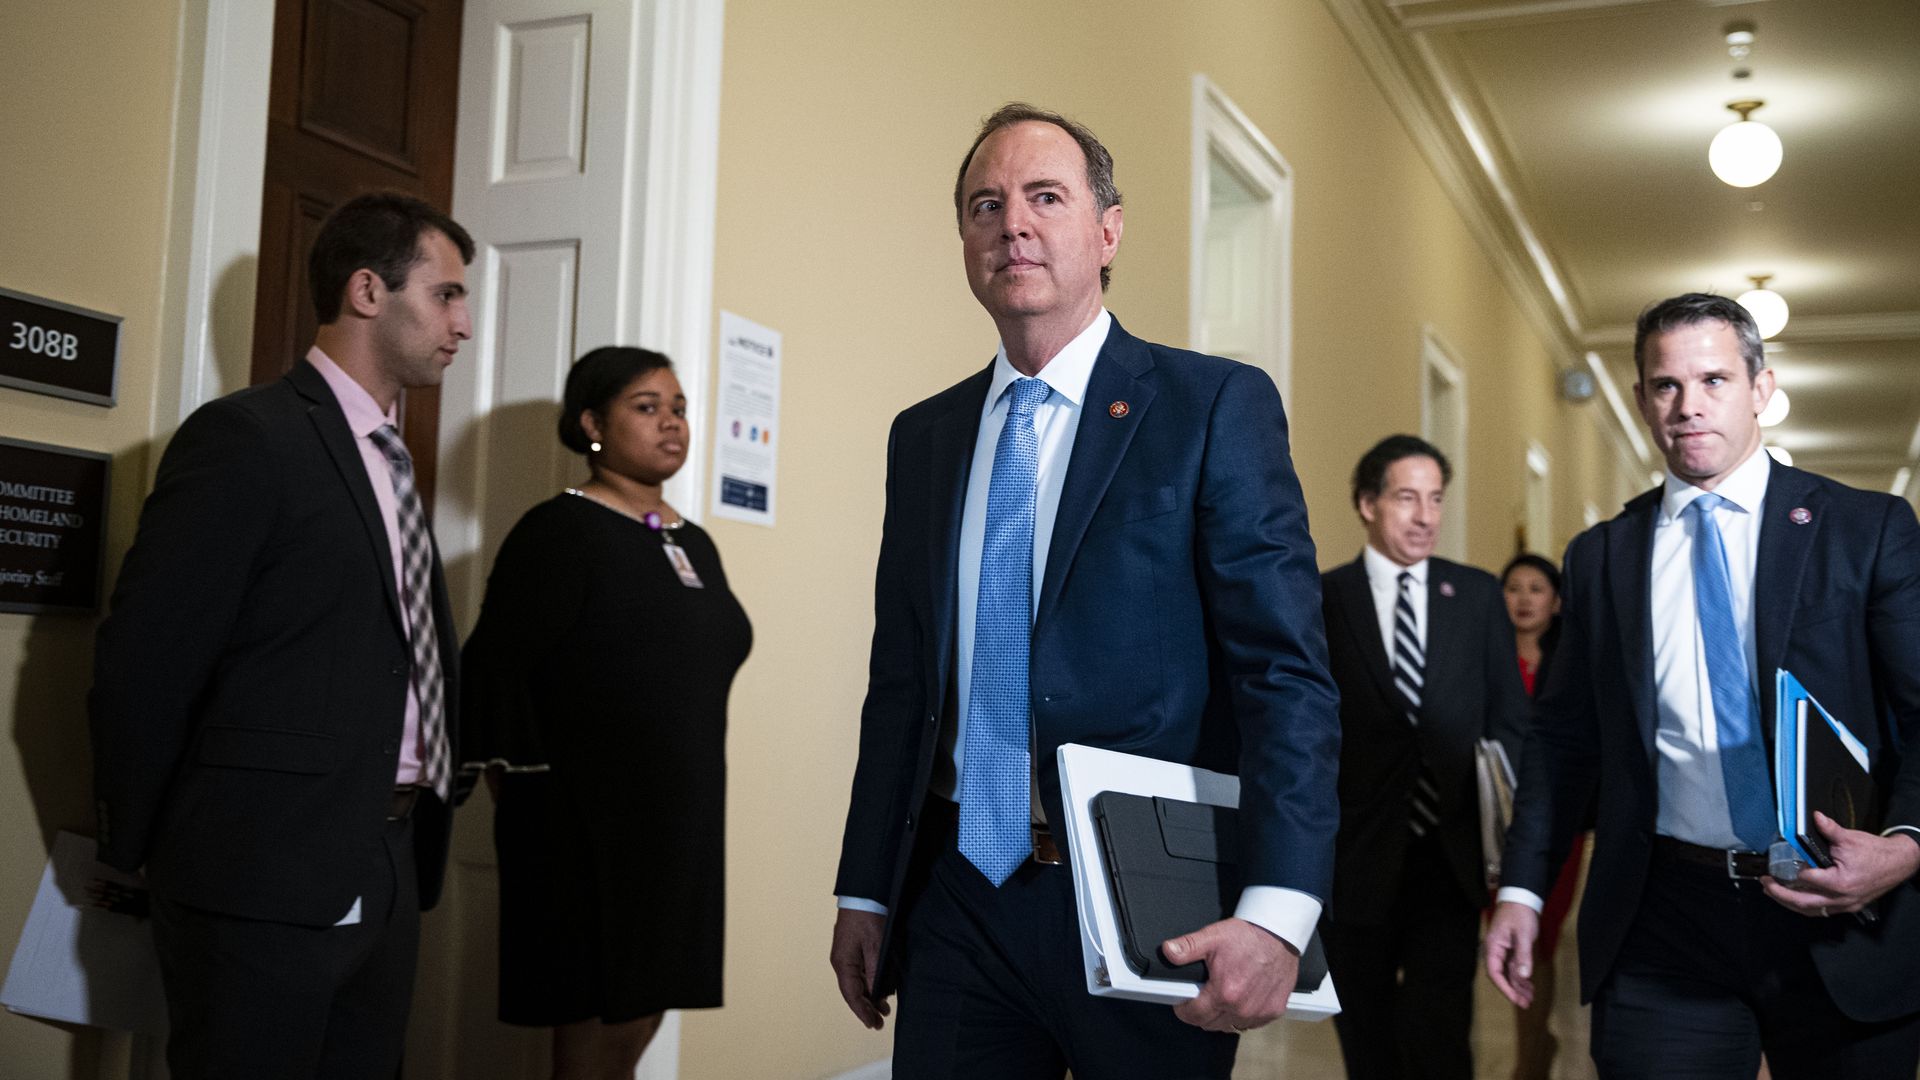  Representative Adam Schiff, a Democrat from California and chairman of the House Intelligence Committee